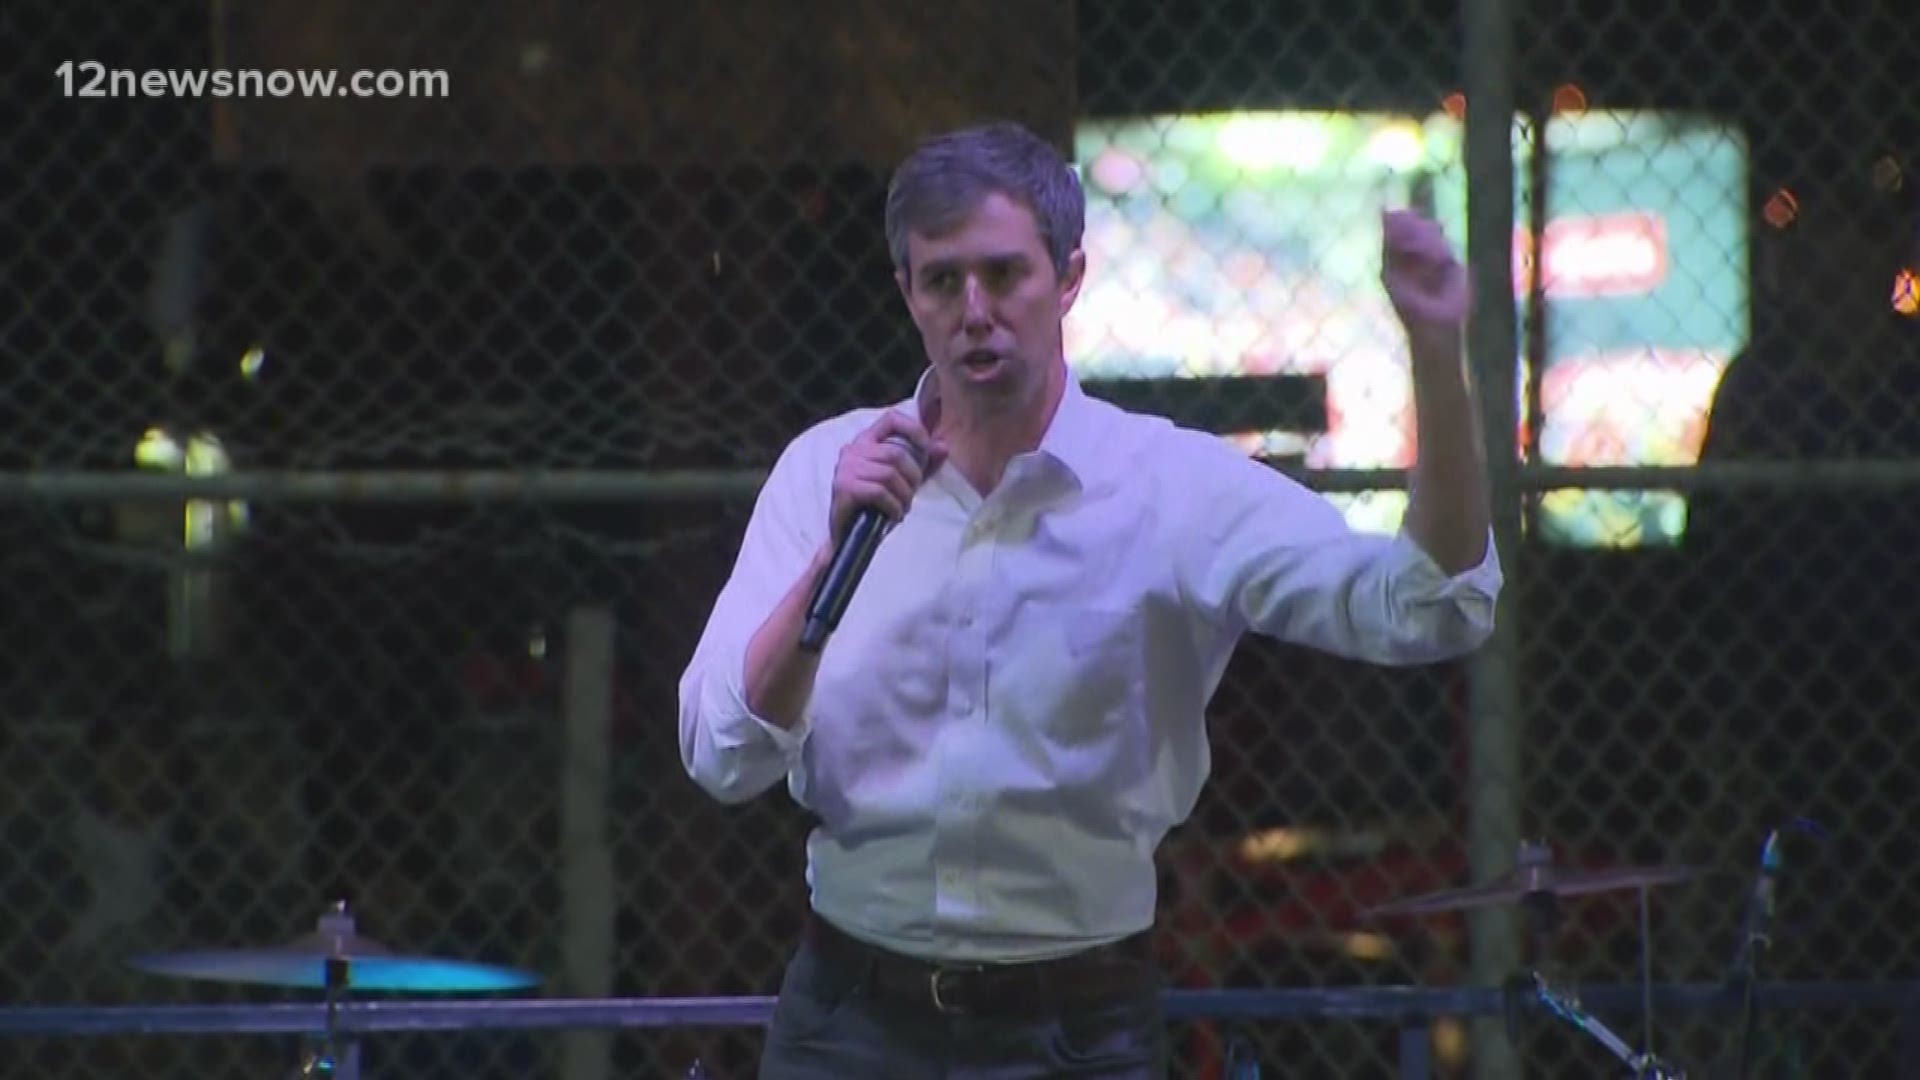 Beto O'Rourke took to the streets of El Paso leading a march that would lead to his rally across the street from where President Trump was currently holding his rally. O'Rourke used his rally to oppose the border wall.